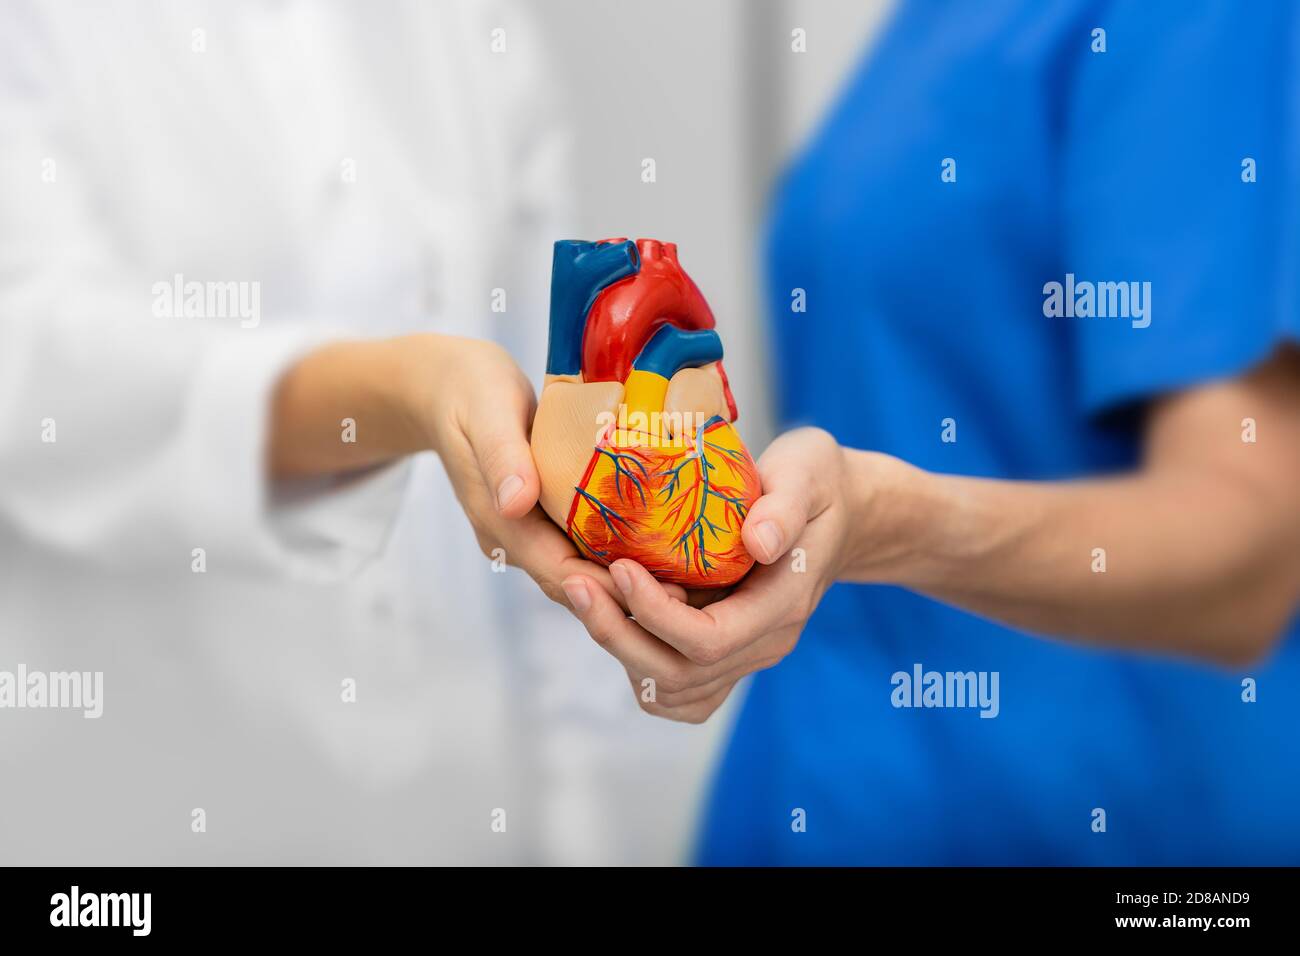 medical concept healthcare and support. doctor and nurse holding a heart in hands, close-up Stock Photo